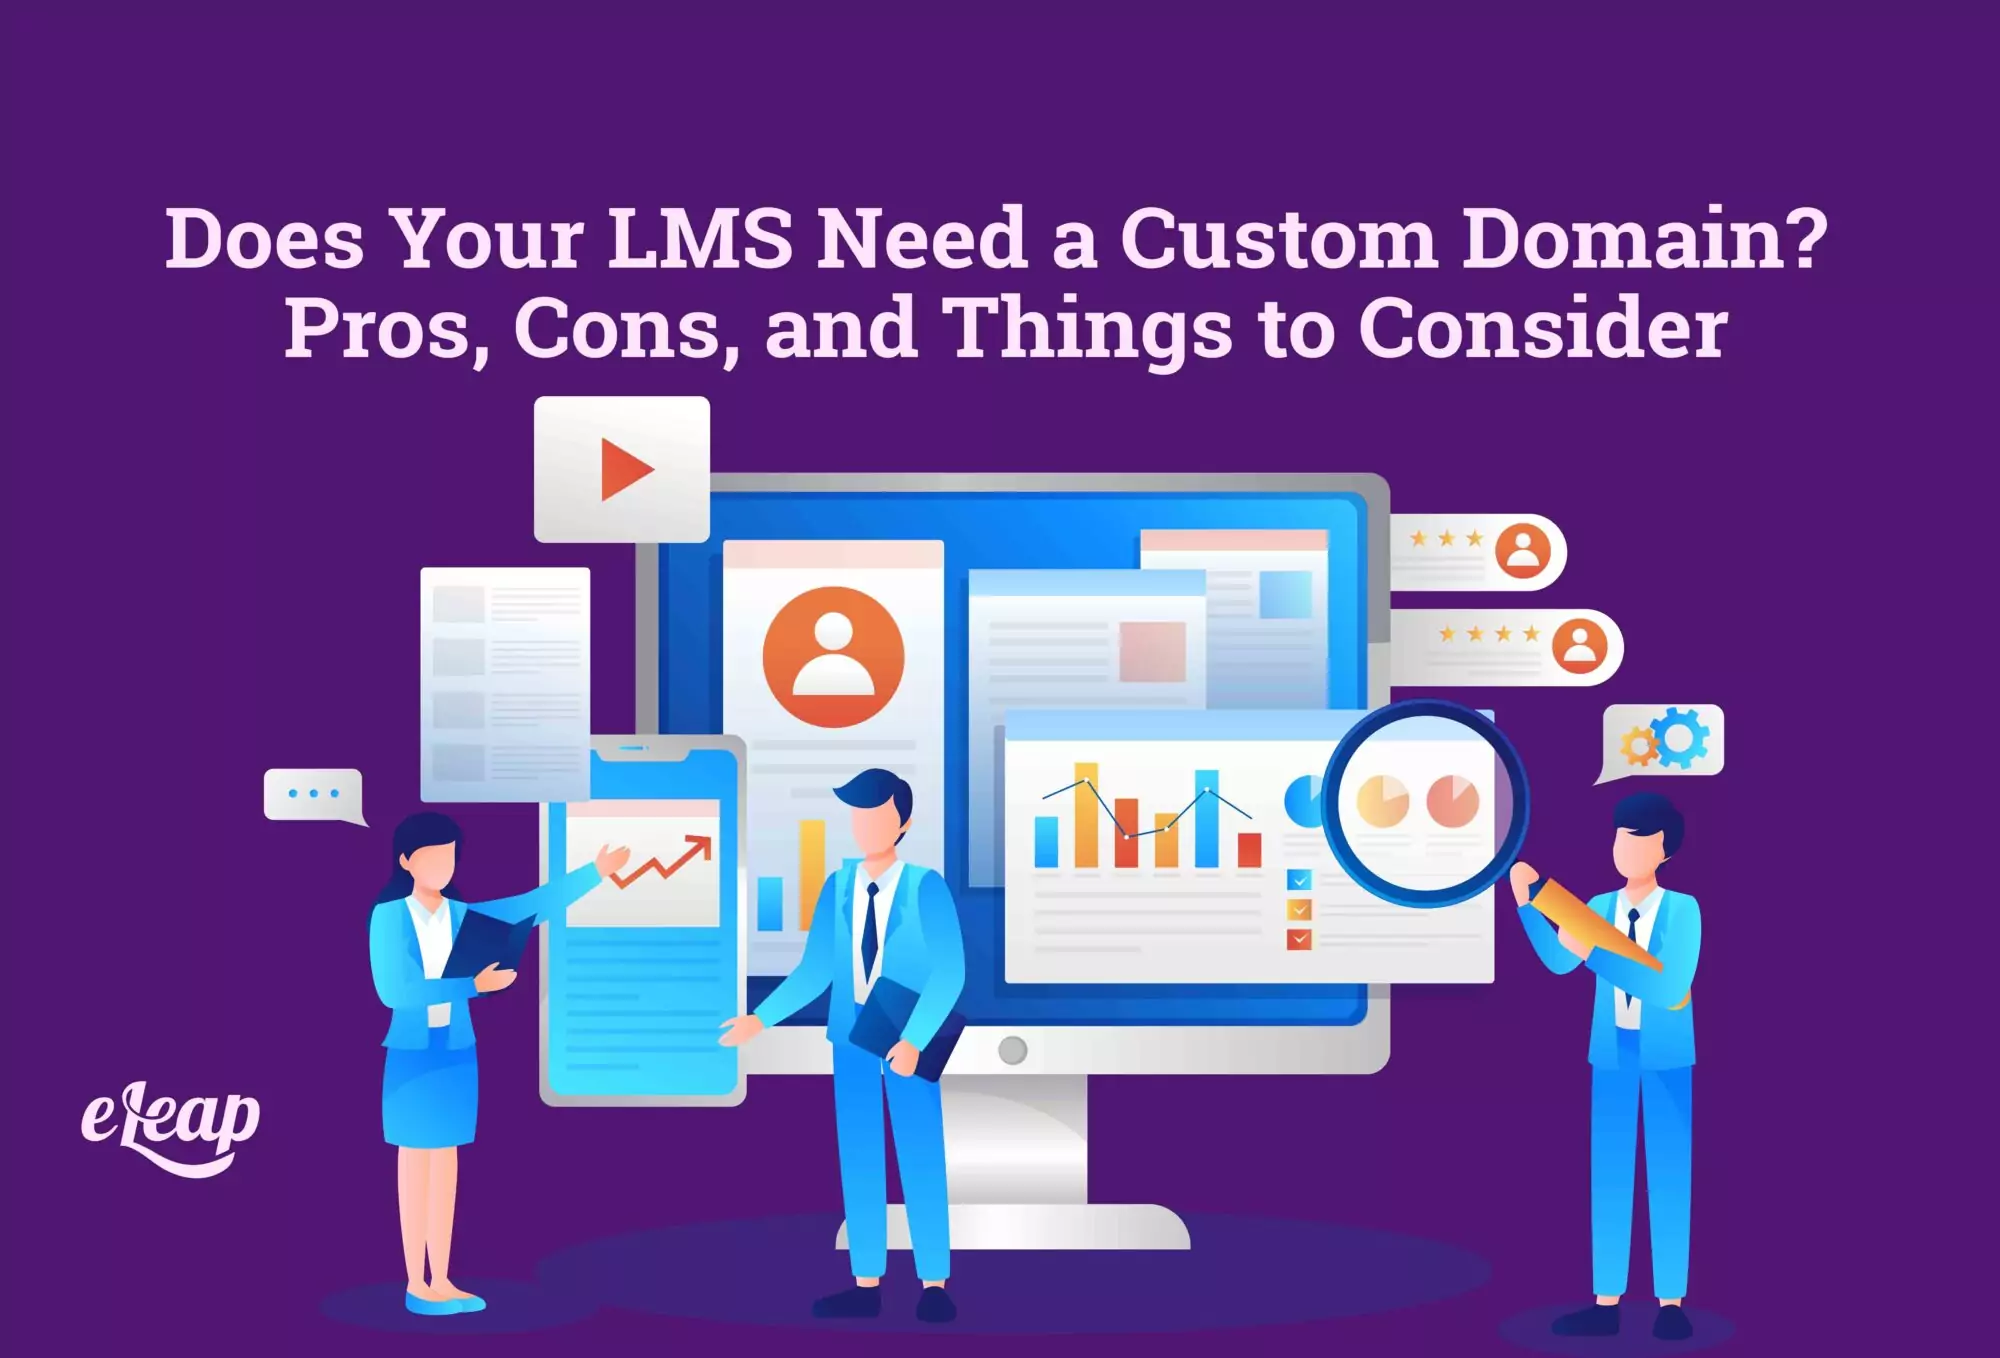 Does Your LMS Need a Custom Domain? Pros, Cons, and Things to Consider